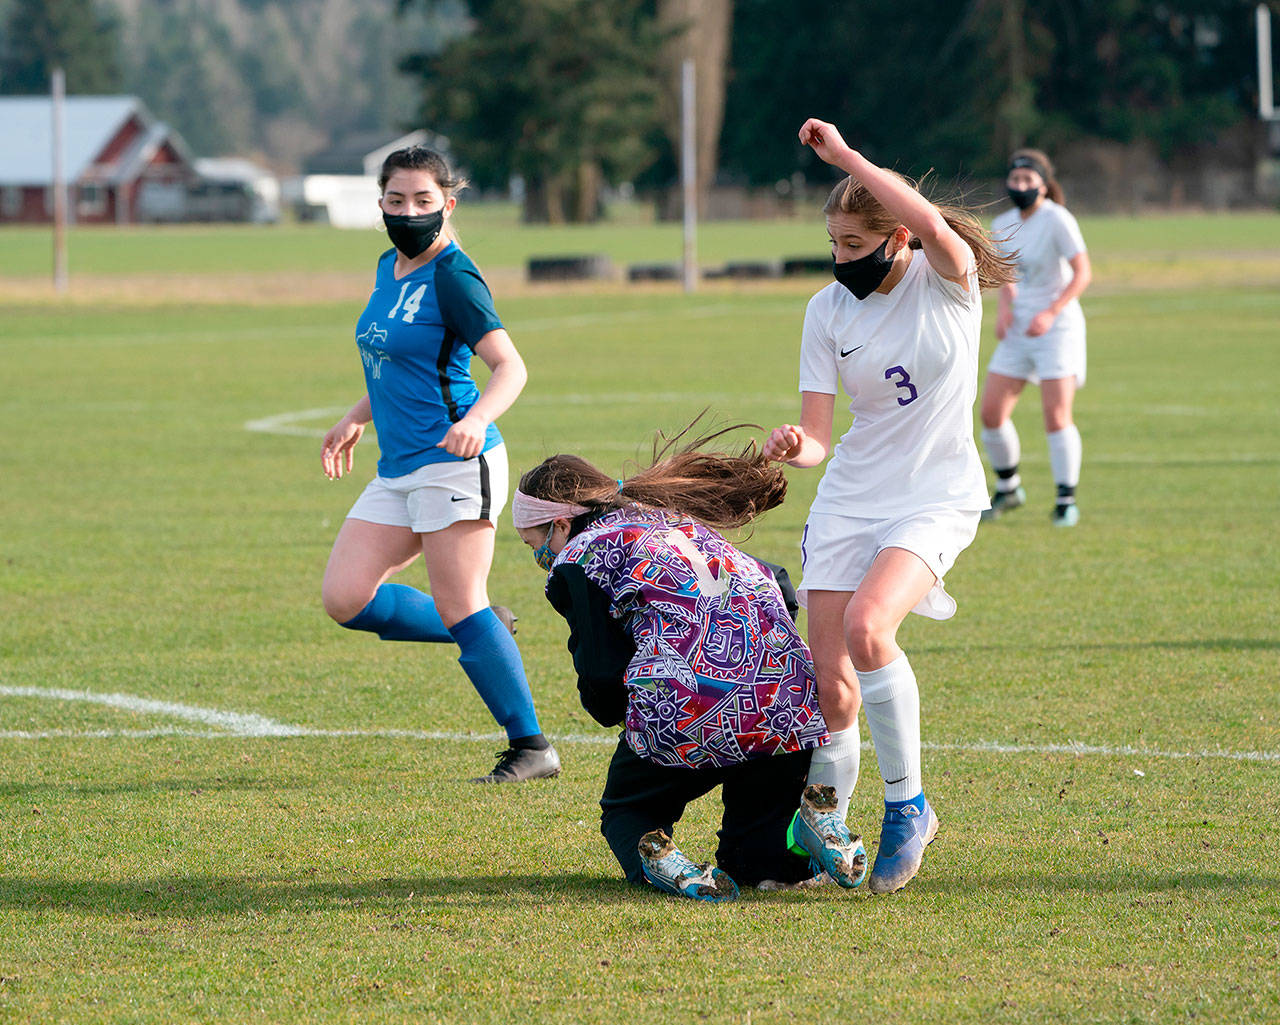 East Jefferson goalkeeper Sorina Johnston, center, saves a shot on goal but trips up Sequim’s Taryn Johnson while covering the ball as Stephanie Sanchez looks on during a game on Wednesday in Chimacum. (Steve Mullensky/for Peninsula Daily News)